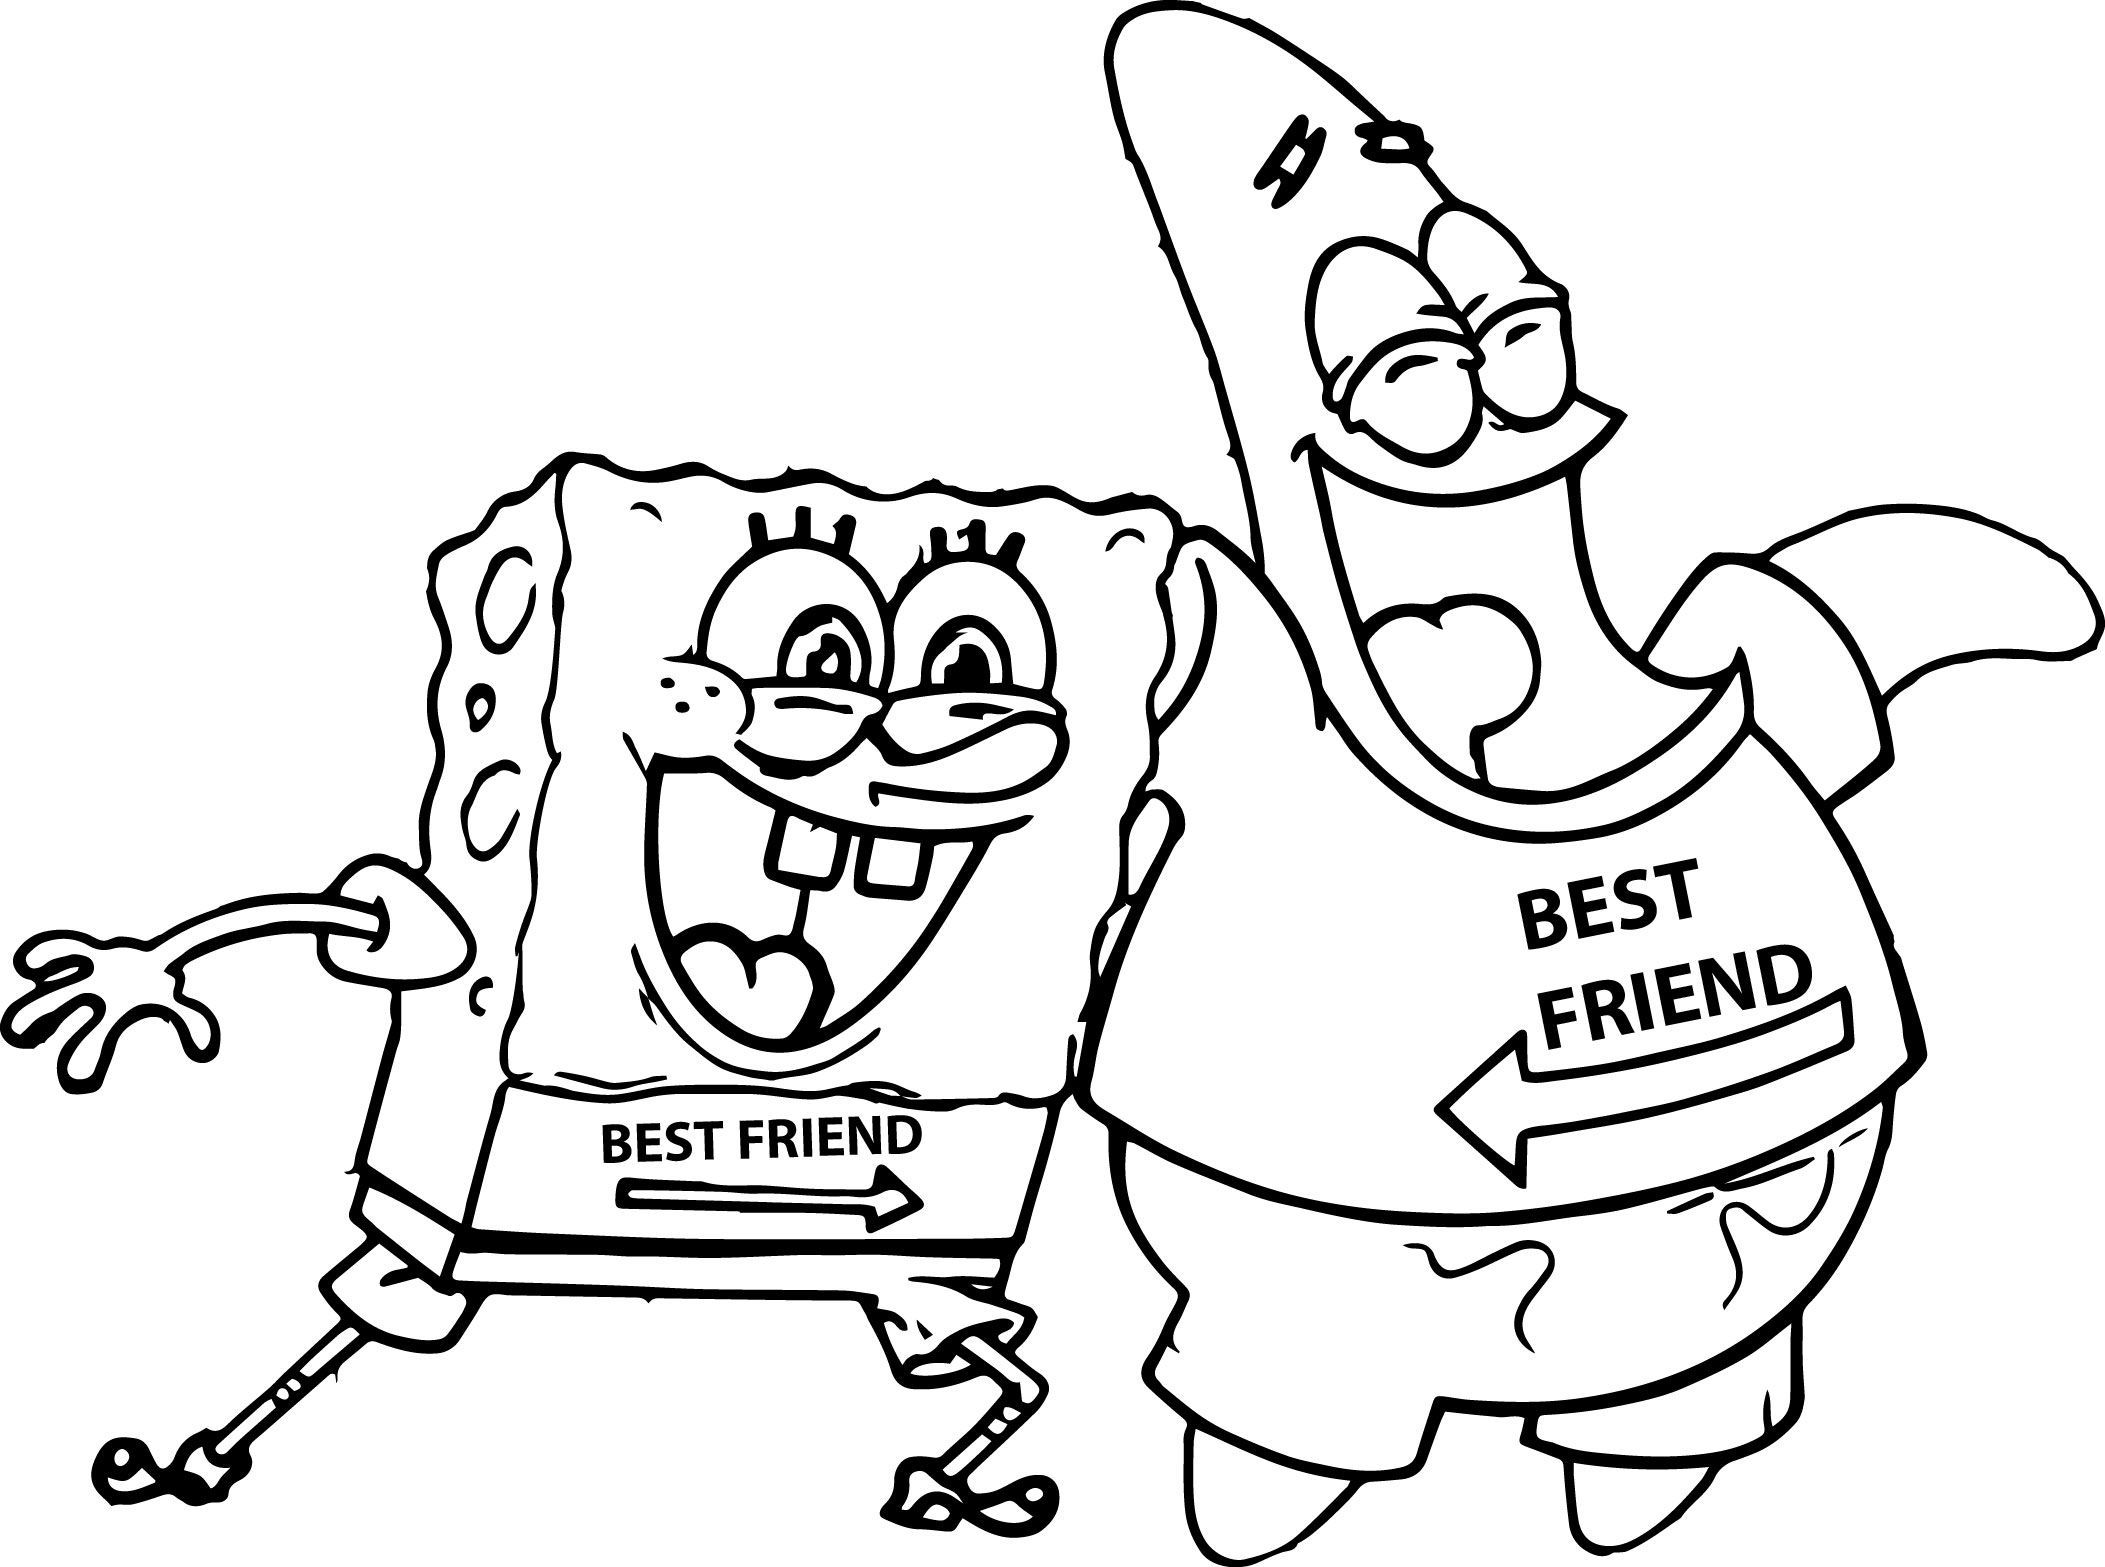 Basic Spongebob And Patrick Coloring Pages Printable Coloring ...